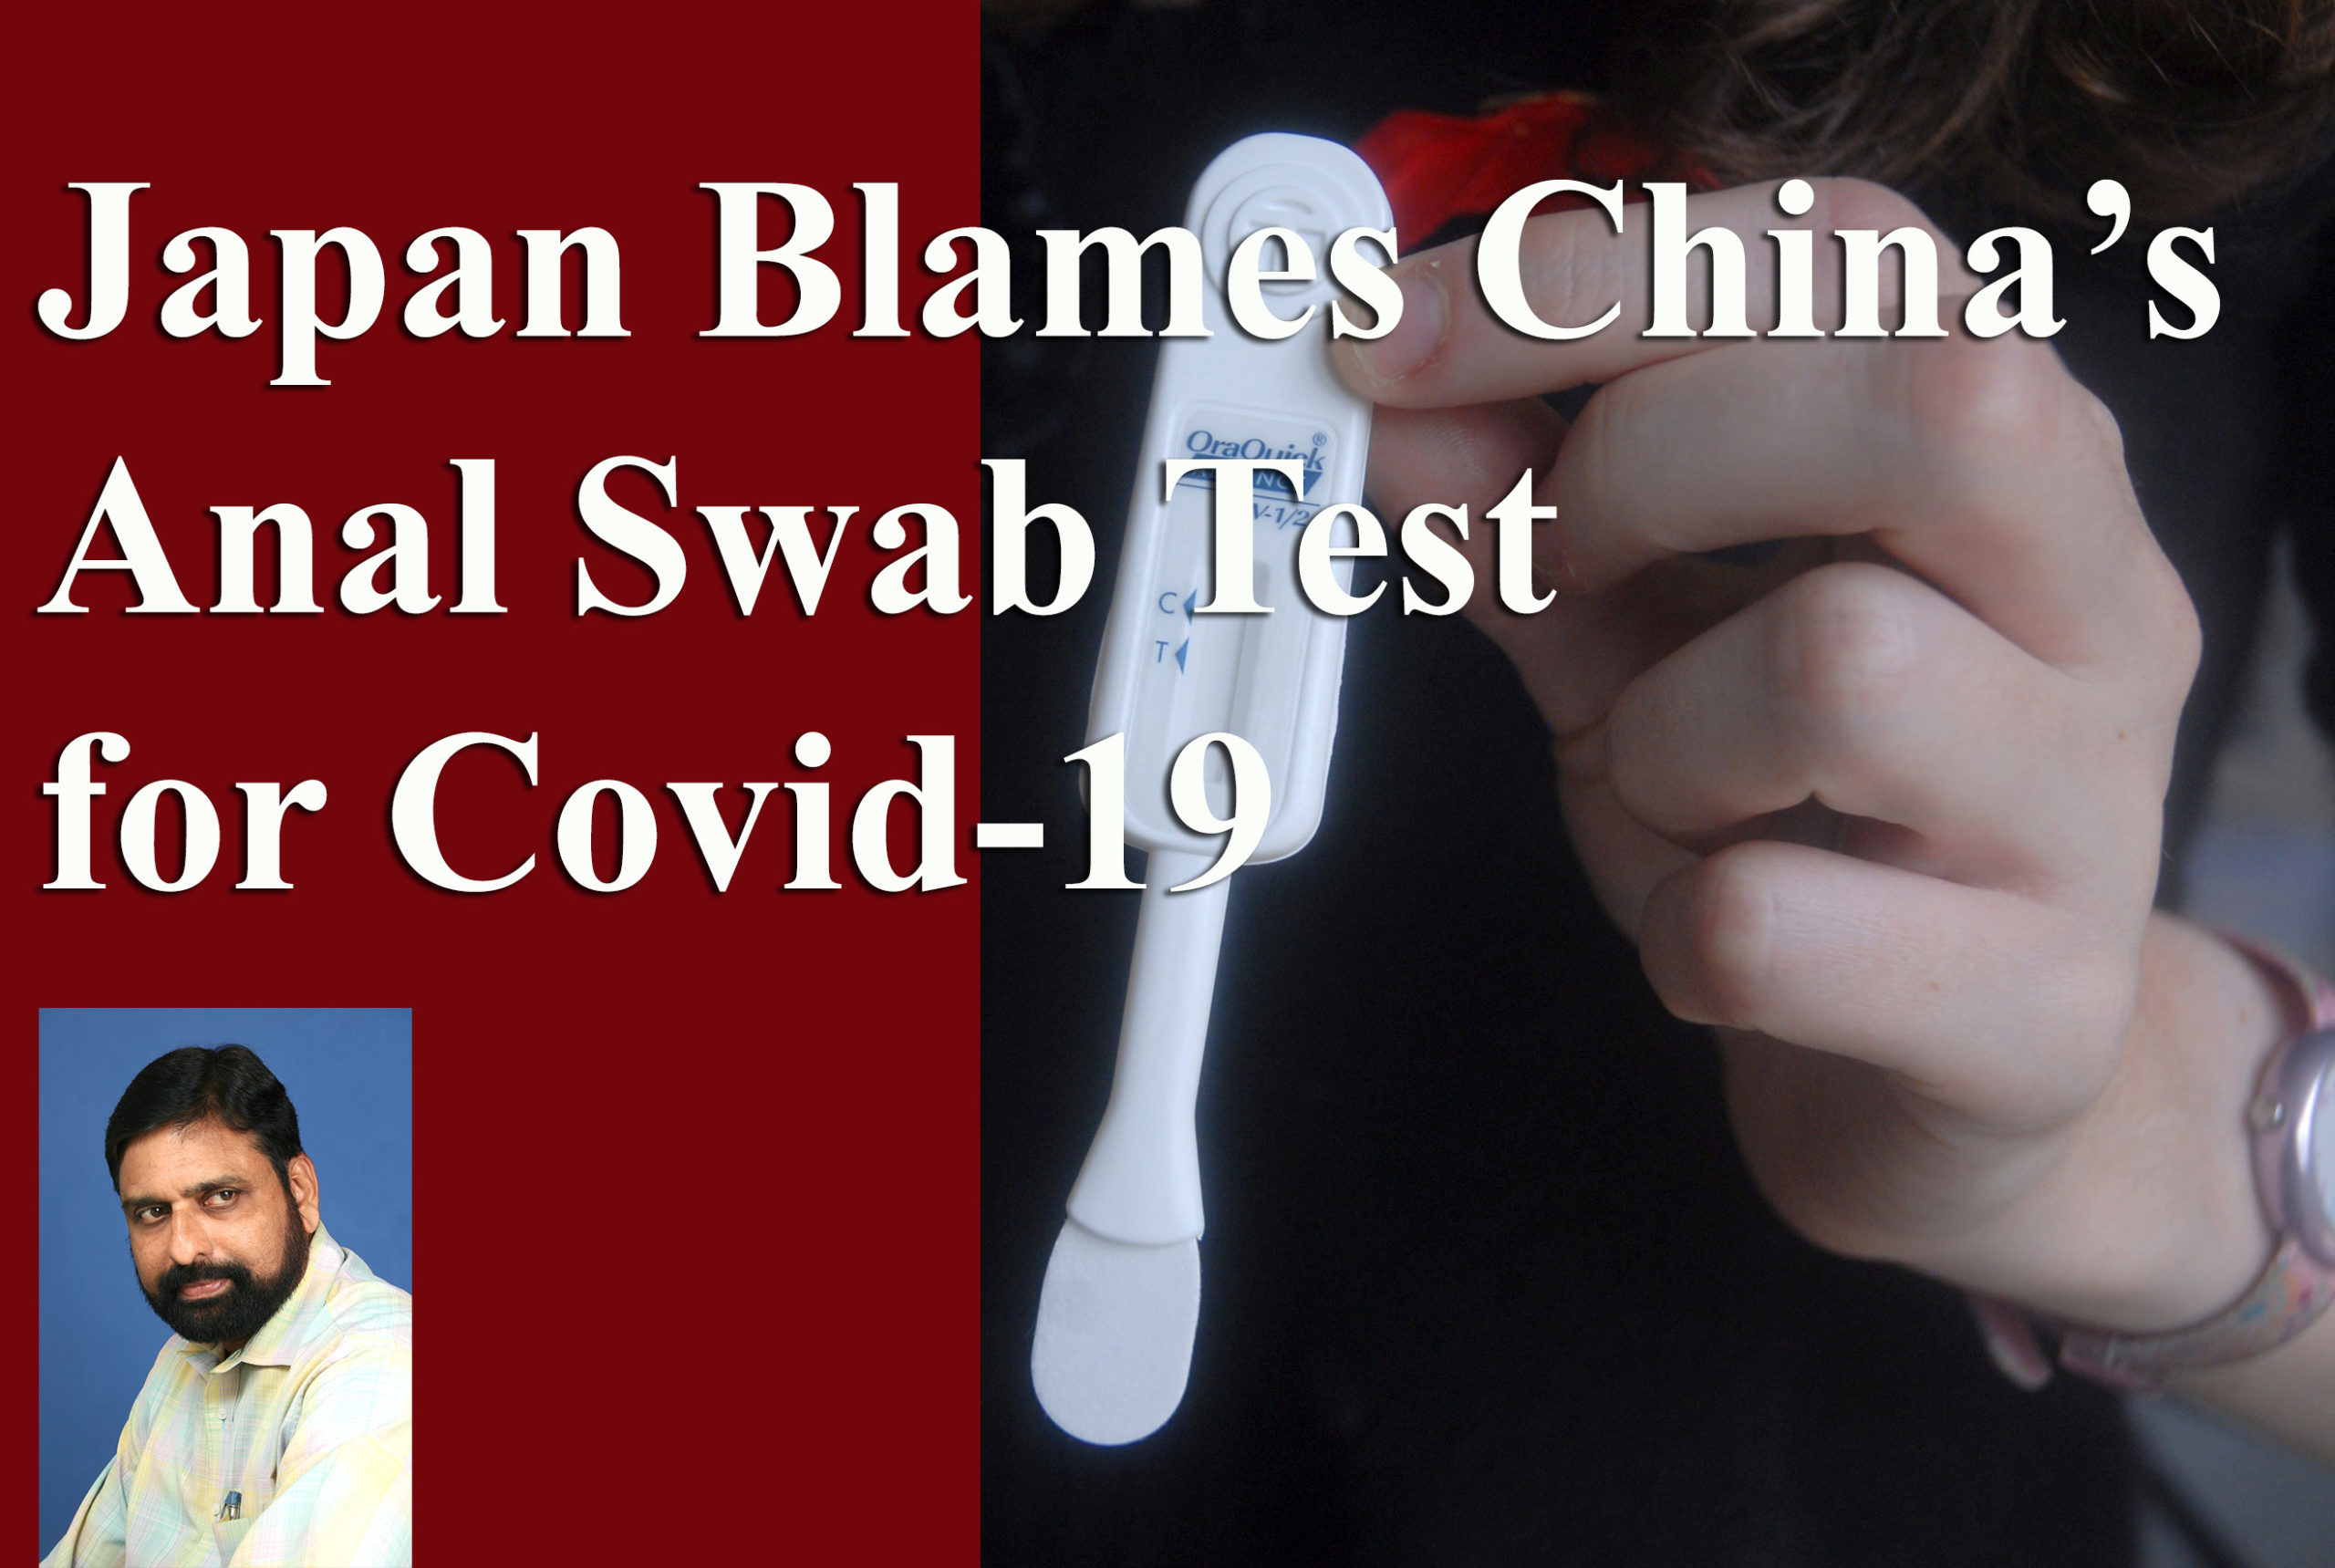 Japan Blames China’s Anal Swab Test for Covid-19